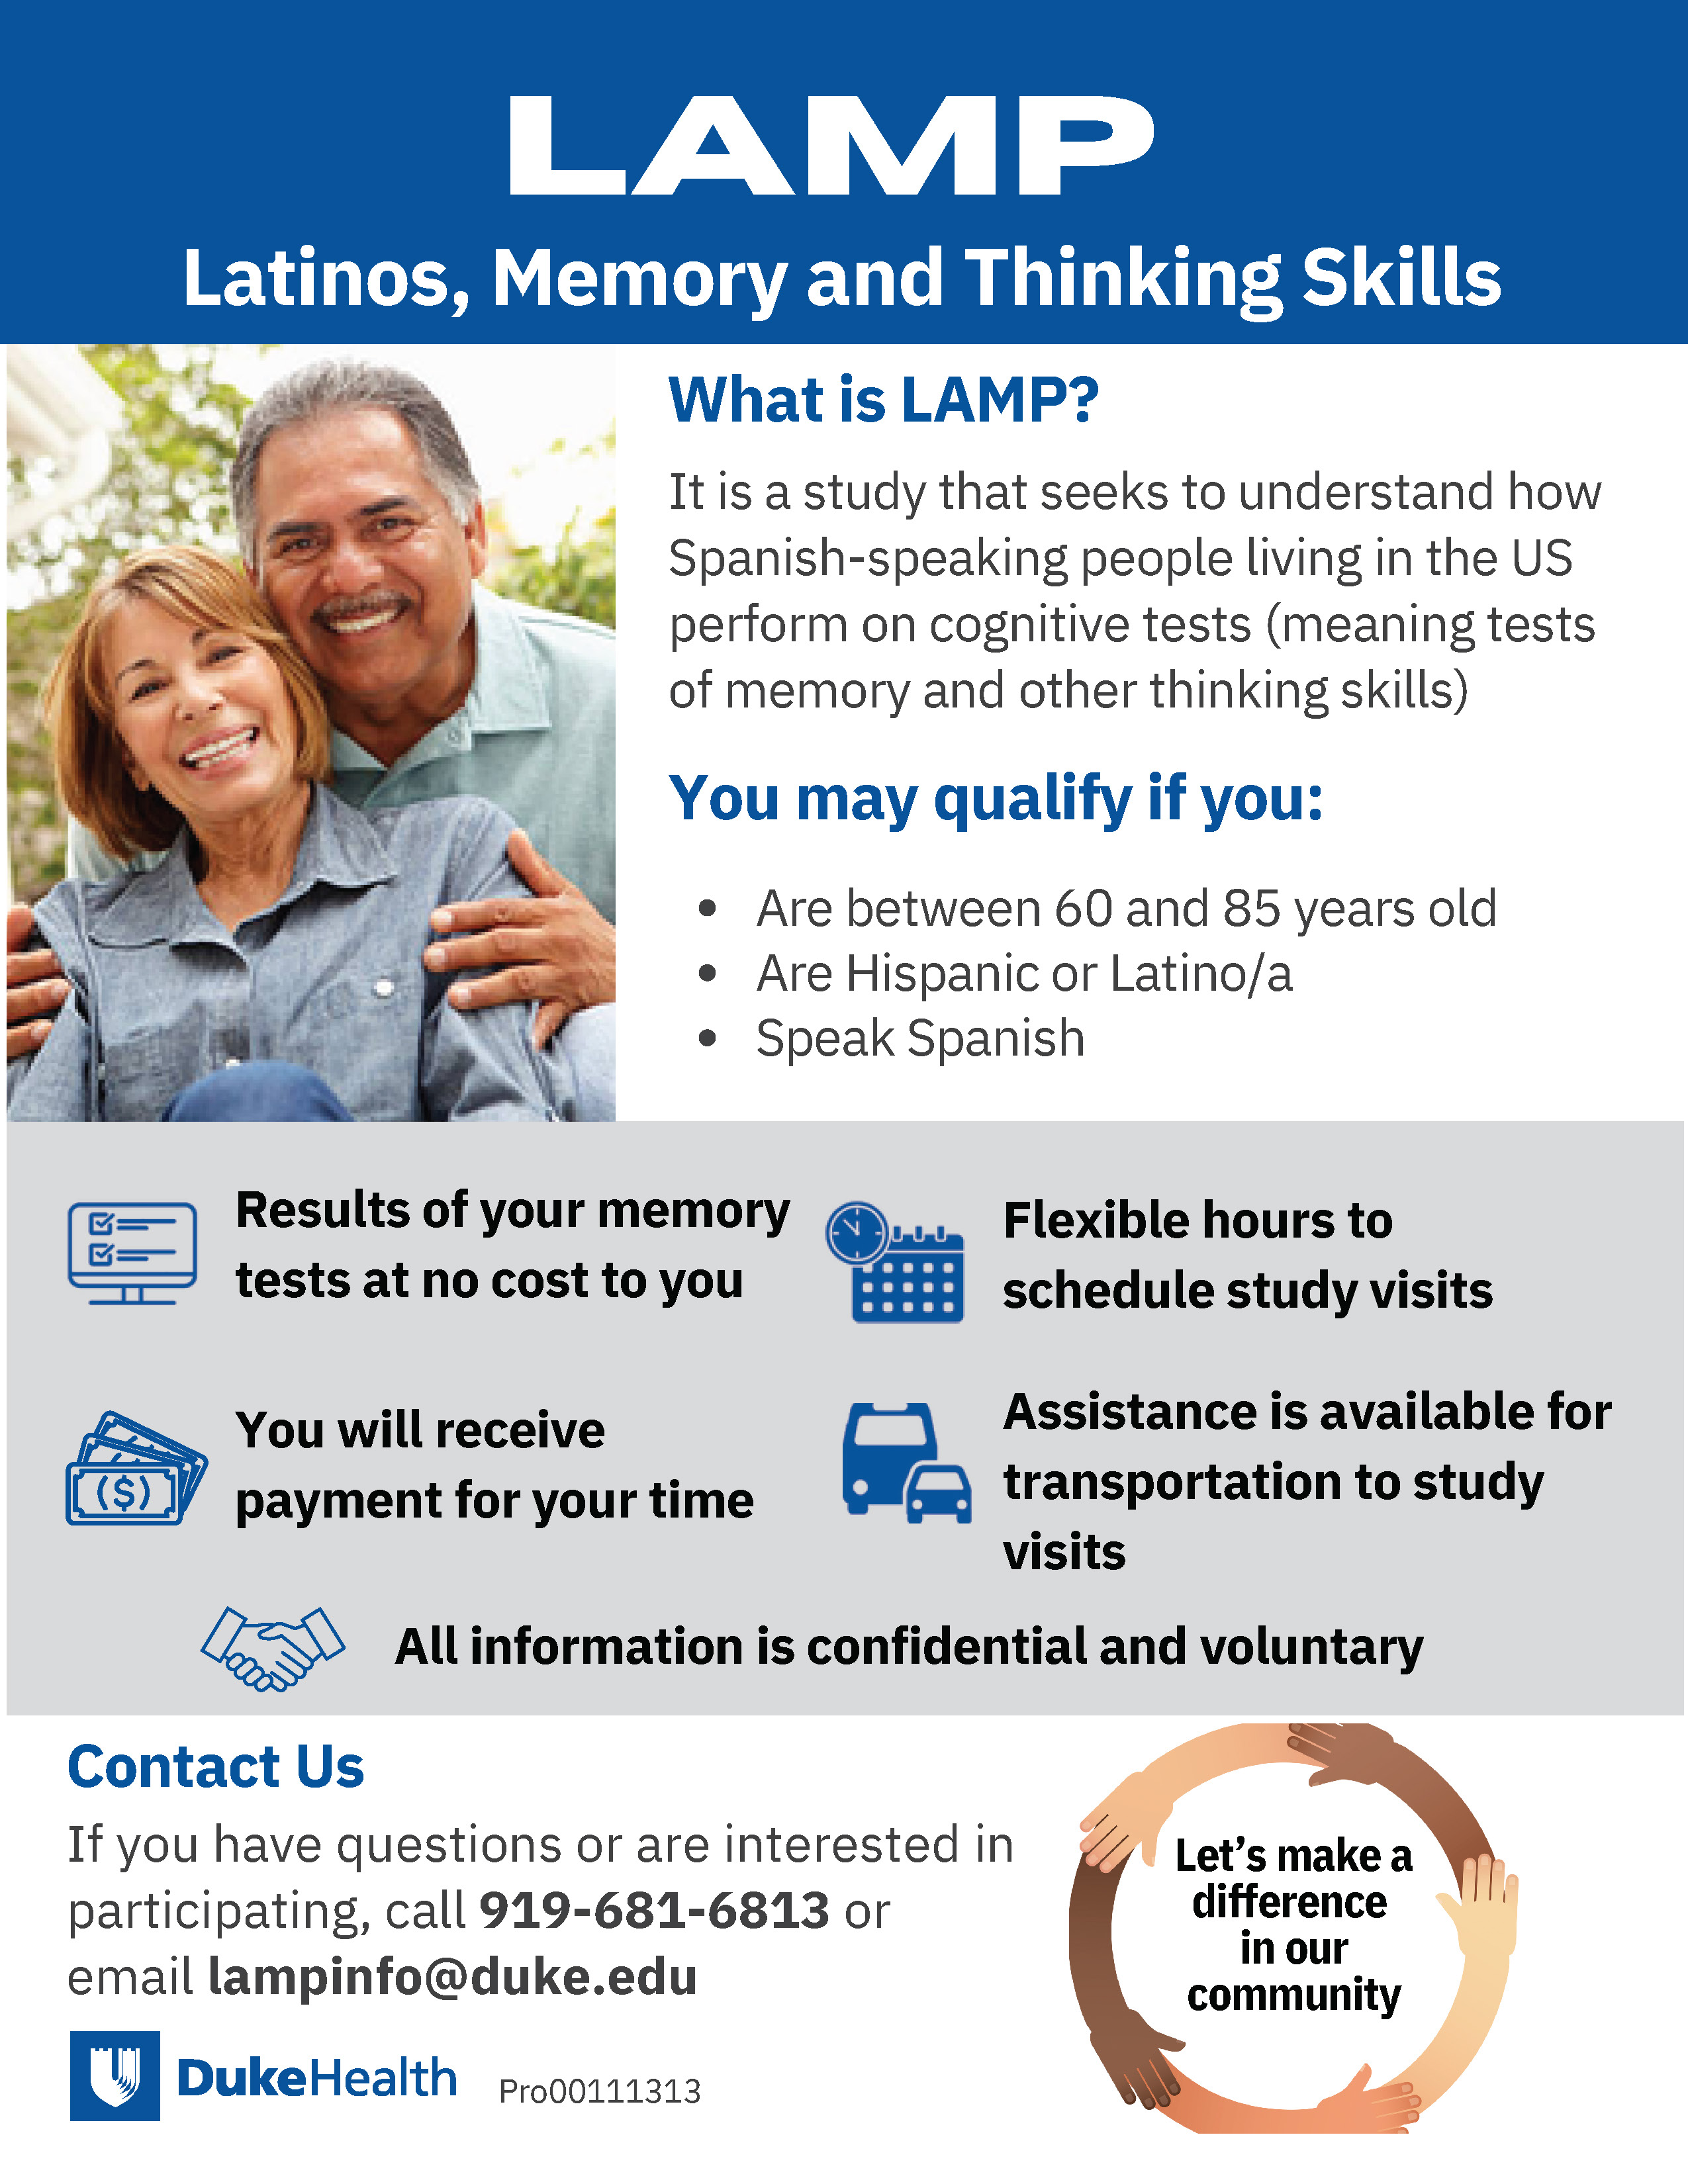 This study seeks to understand how Spanish-speaking people living in the US perform cognitive tests (meaning tests of memory and other thinking skills).    You could qualify if:  You are between 60 and 85 years old You are Hispanic or Latino/a Speak Spanish   You will receive the results of your memory tests at no cost to you.  You will also receive payment for your time.  We offer flexible hours to schedule study visits, and all information is confidential and voluntary.  Assistance is available for transportation to study visits.  If you are interested please call us at 919-681-3957 or send us an email to LAMPinfo@duke.edu